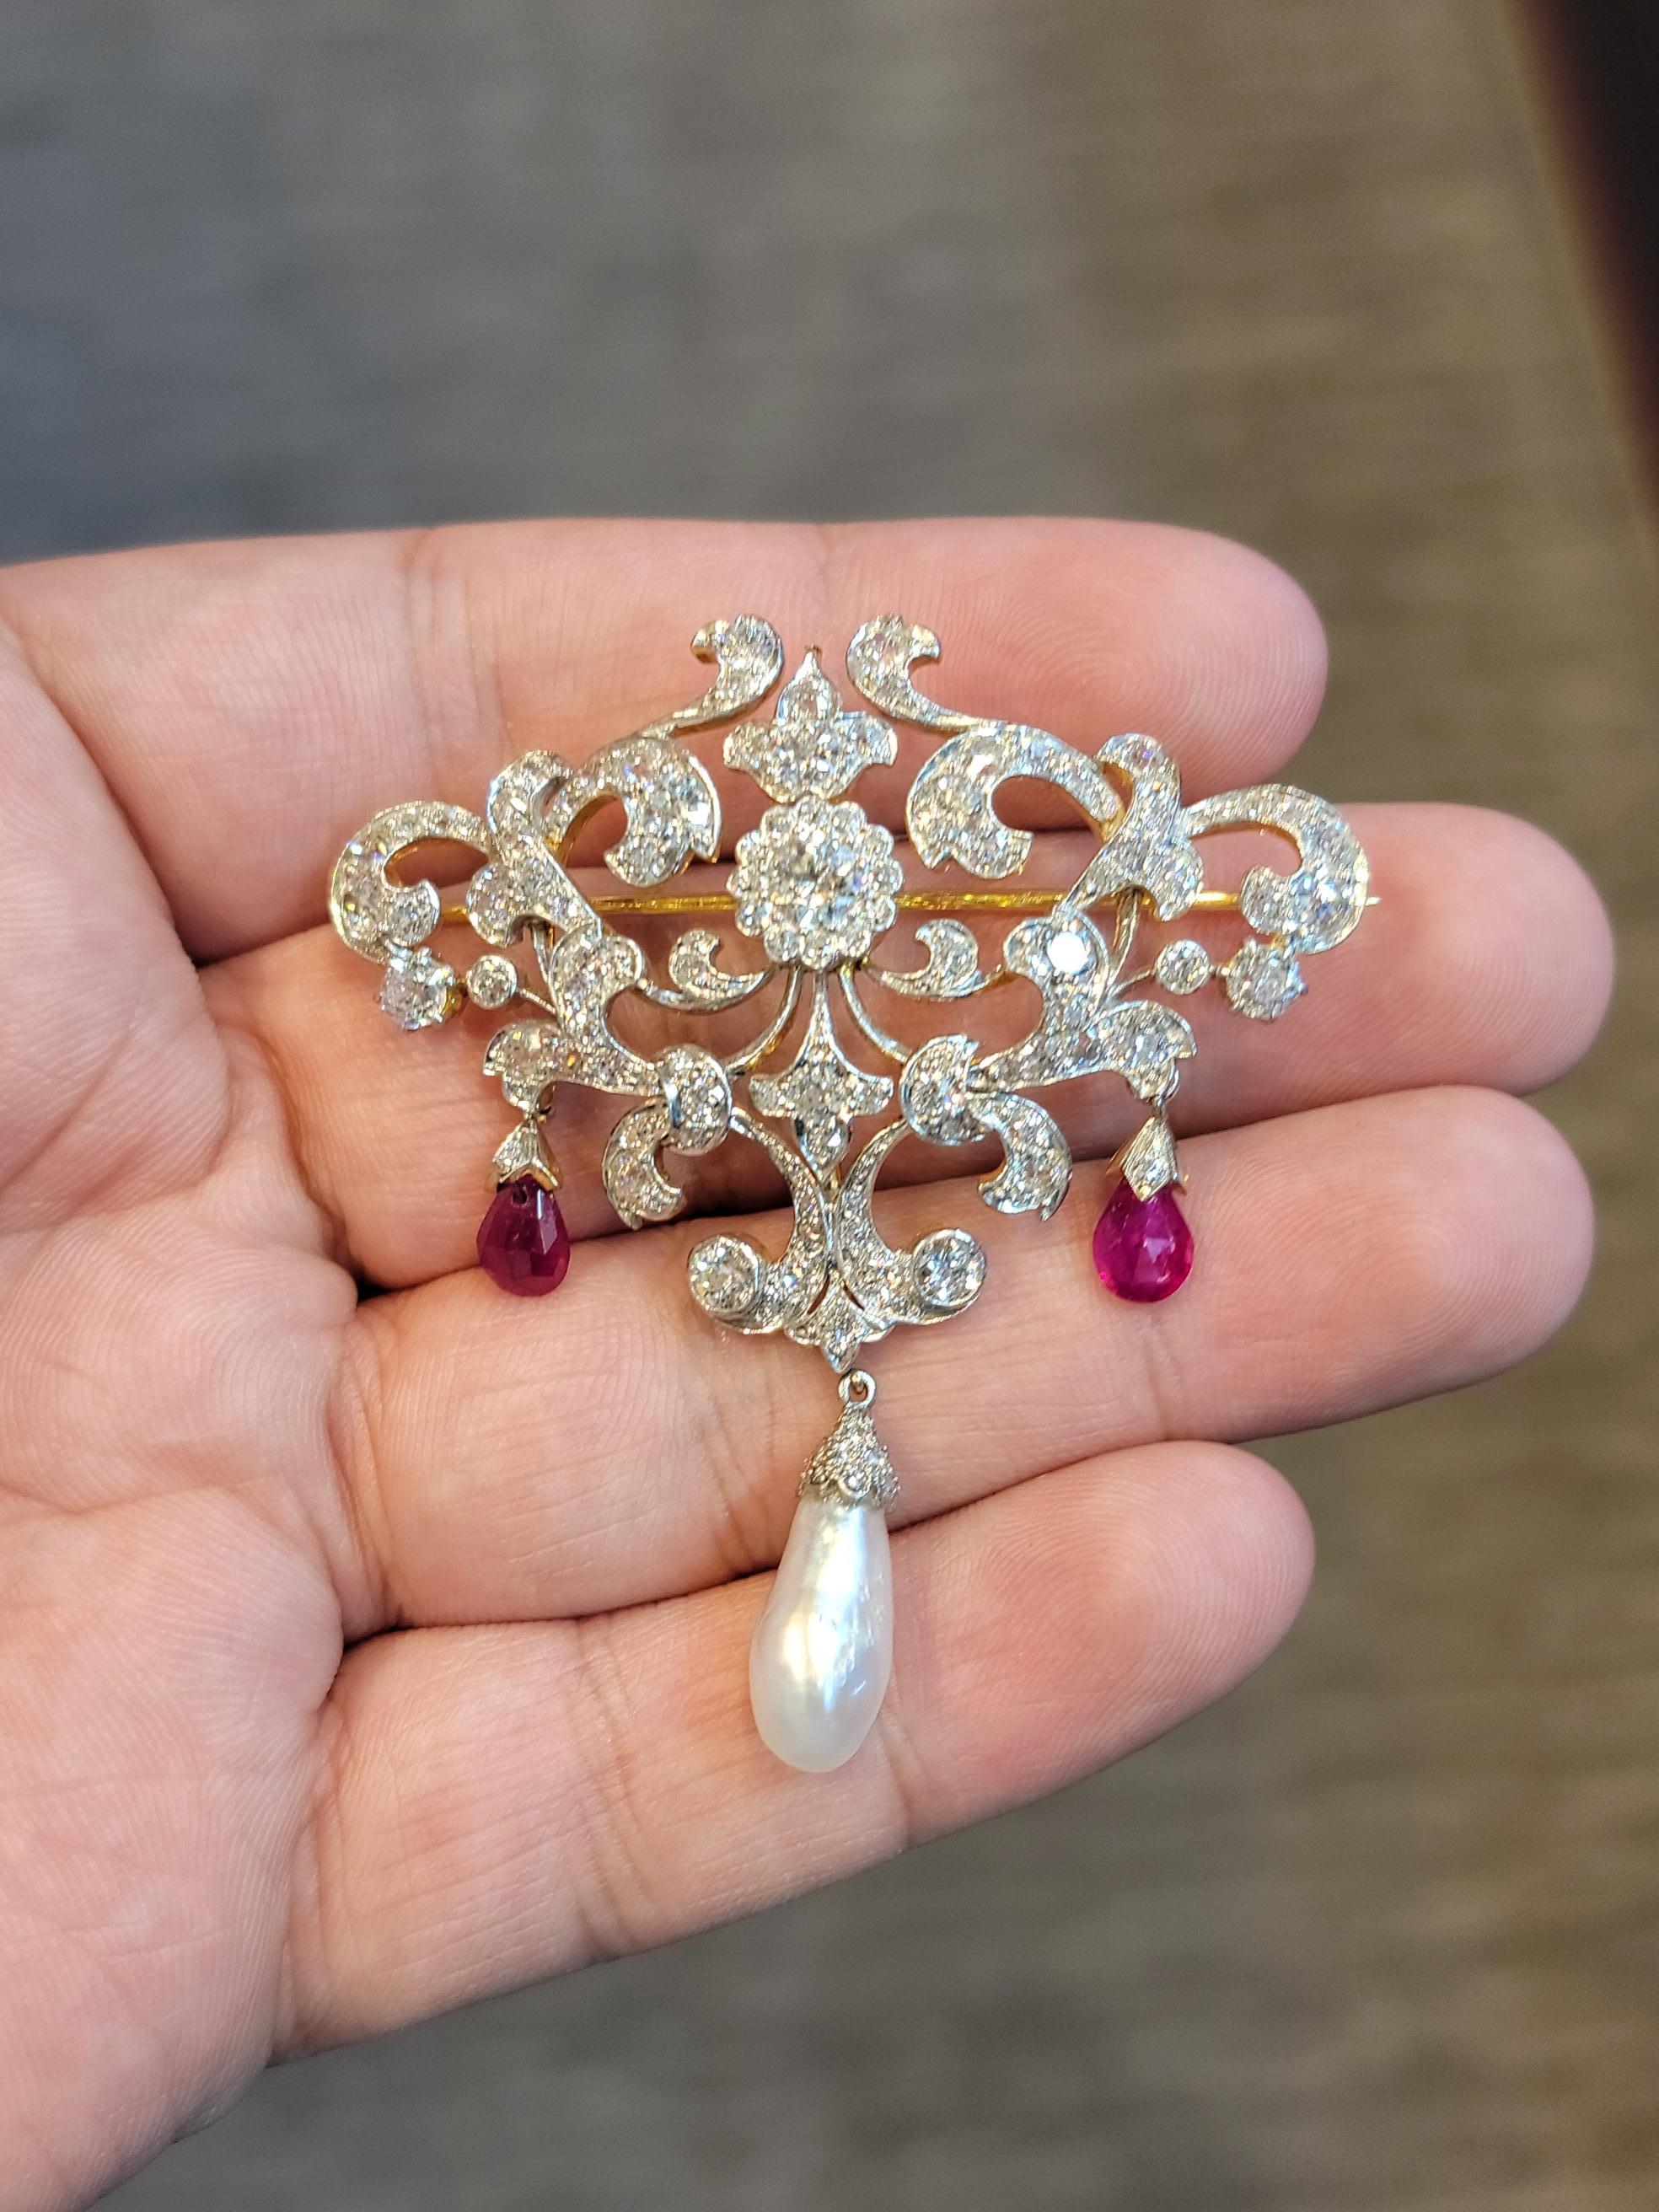 Garland Style Antique Pearl and Ruby Brooch

One cultured pearl drop
Approximate Weights:
2.7 ct. of Rubies
.50 ct. Euro Cut Diamond in Center
6.7 ct. of Diamonds

Madee Circa 1900

Set in Platinum and 18k Gold